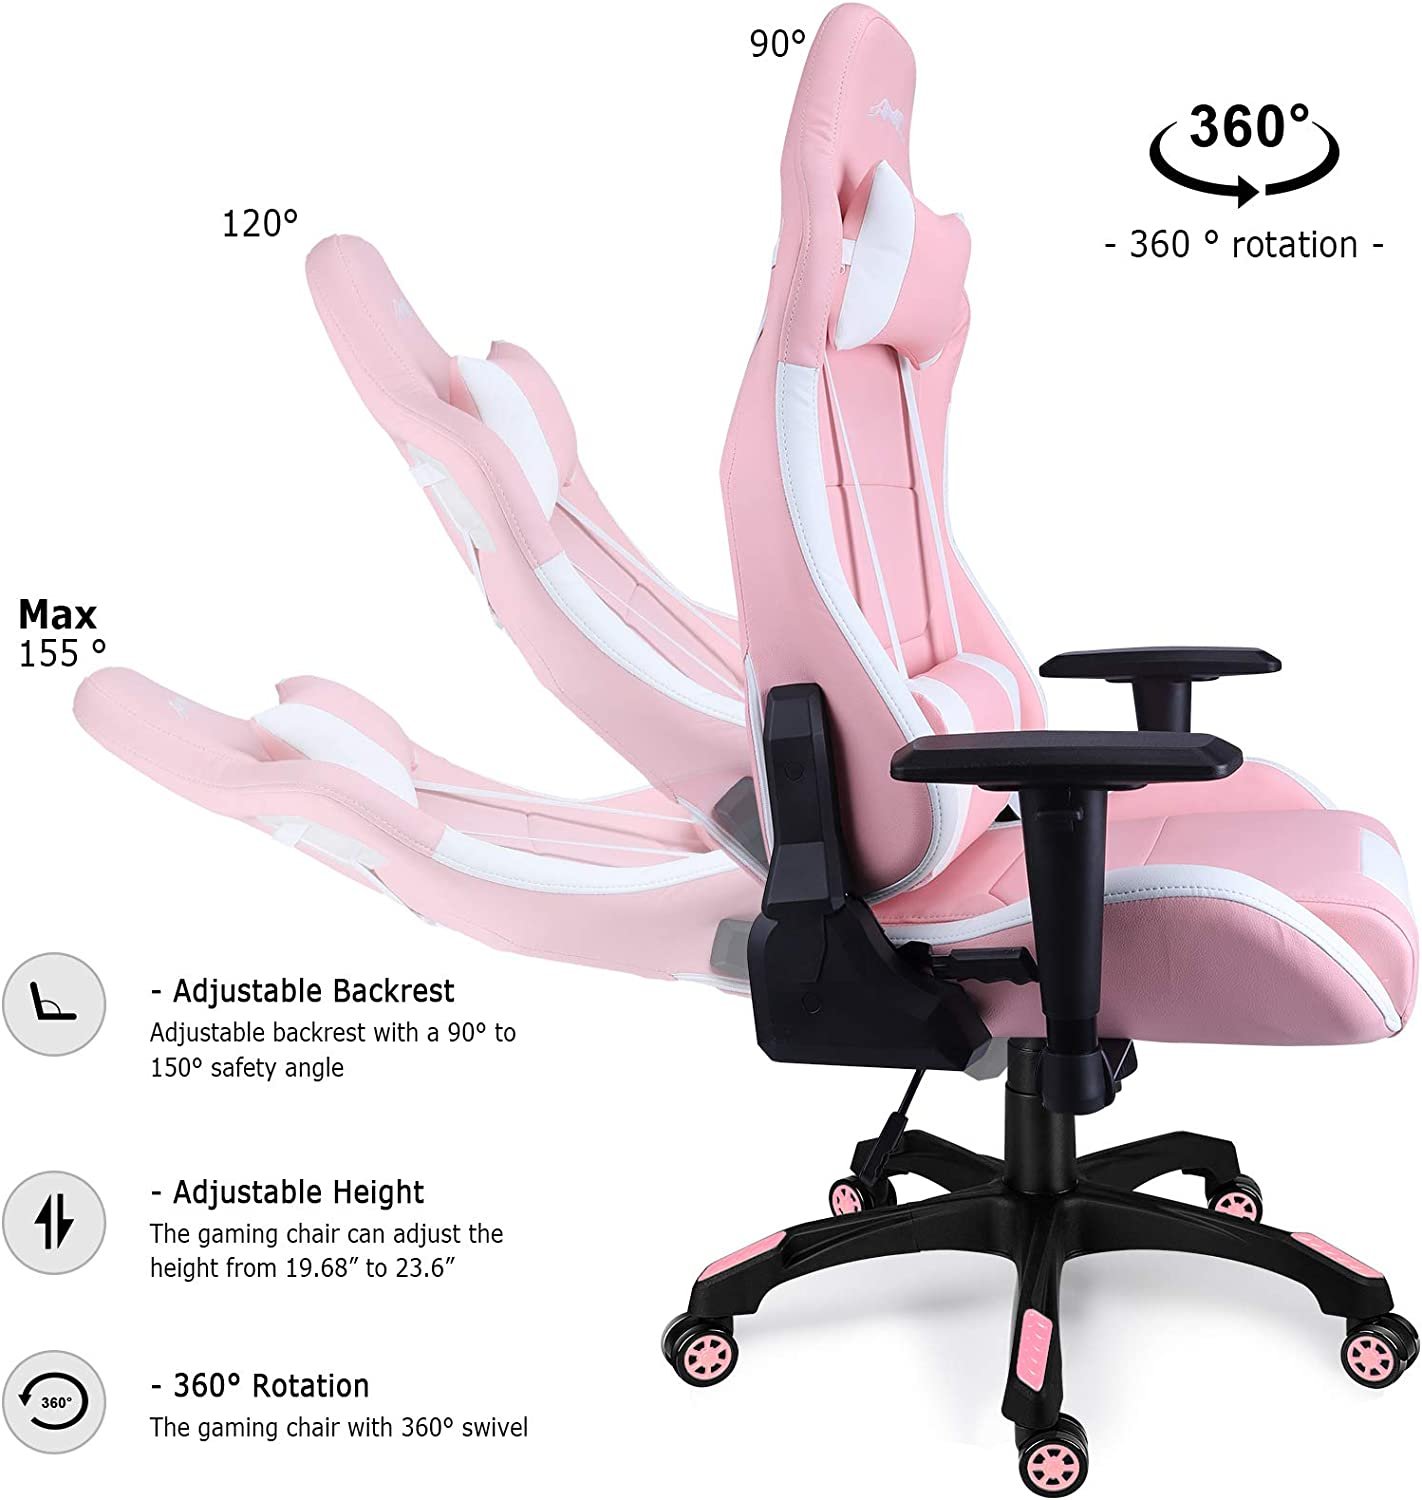 A gaming chair should be adjustable to fit a gamer's personal physique.